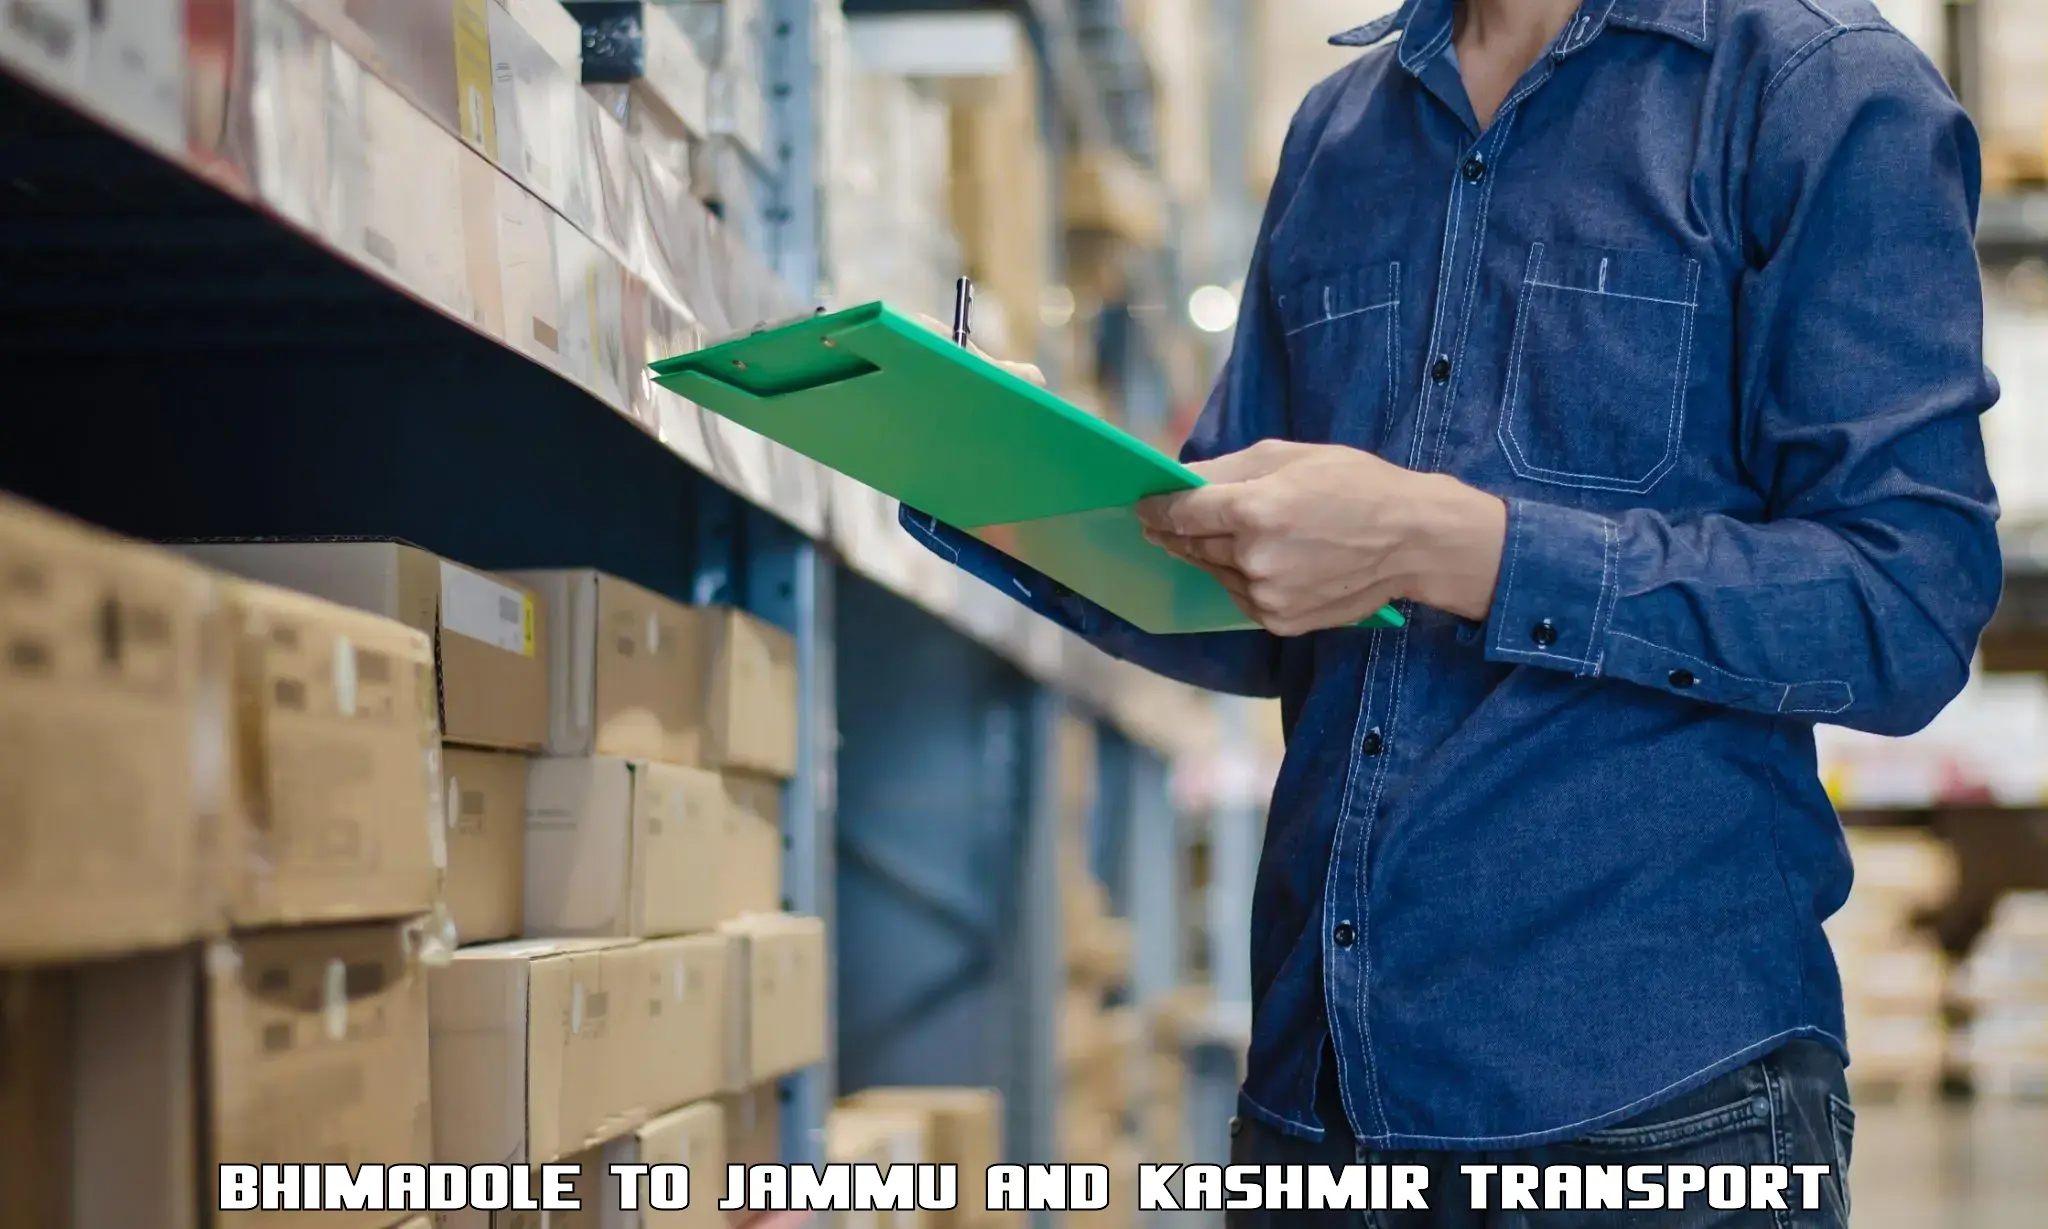 Container transport service Bhimadole to Jammu and Kashmir